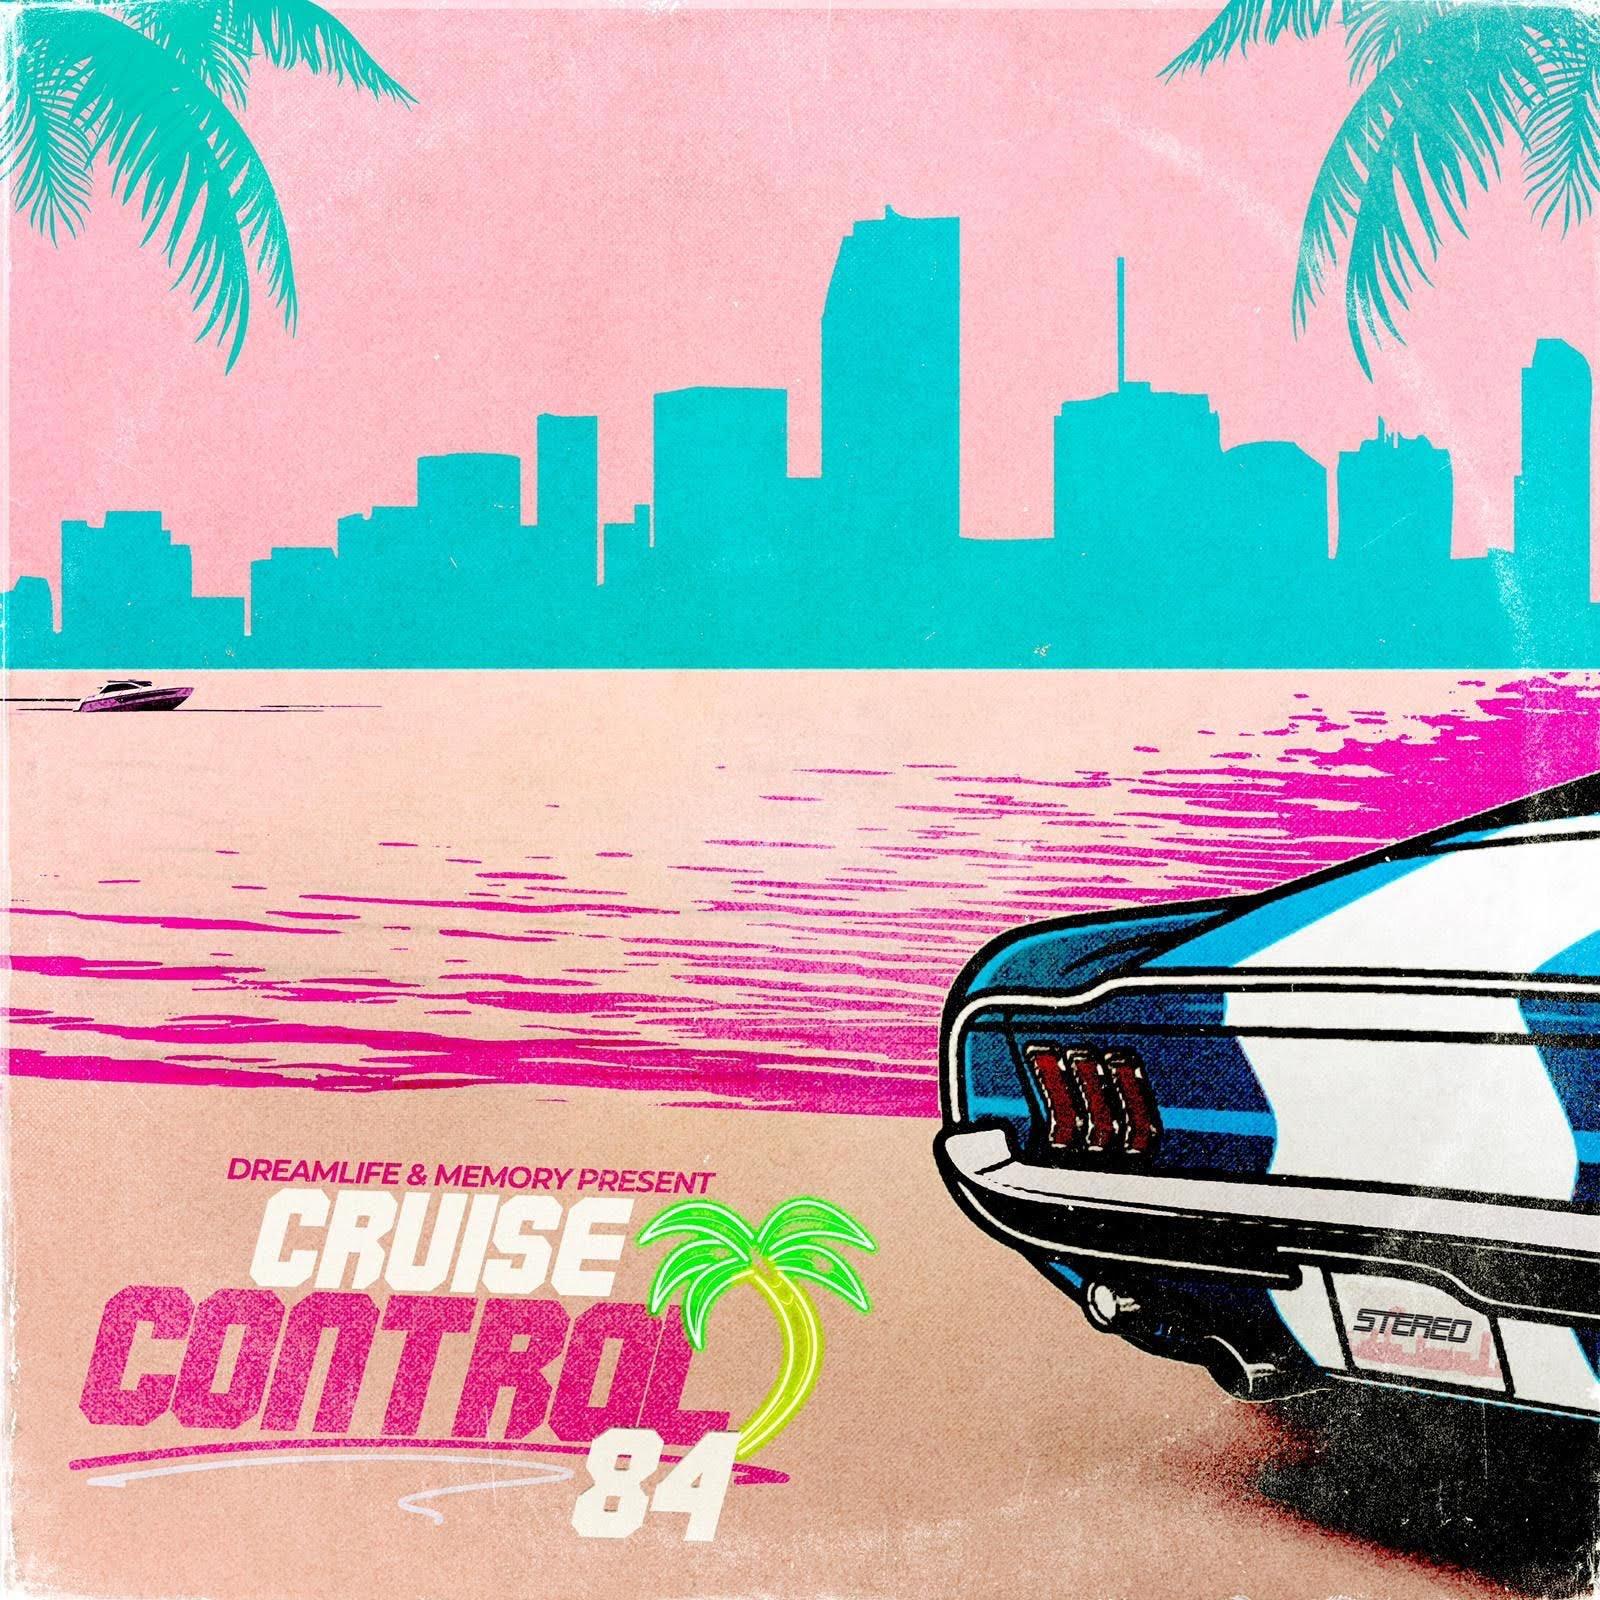 Cruise Control 84 - The Sample Lab